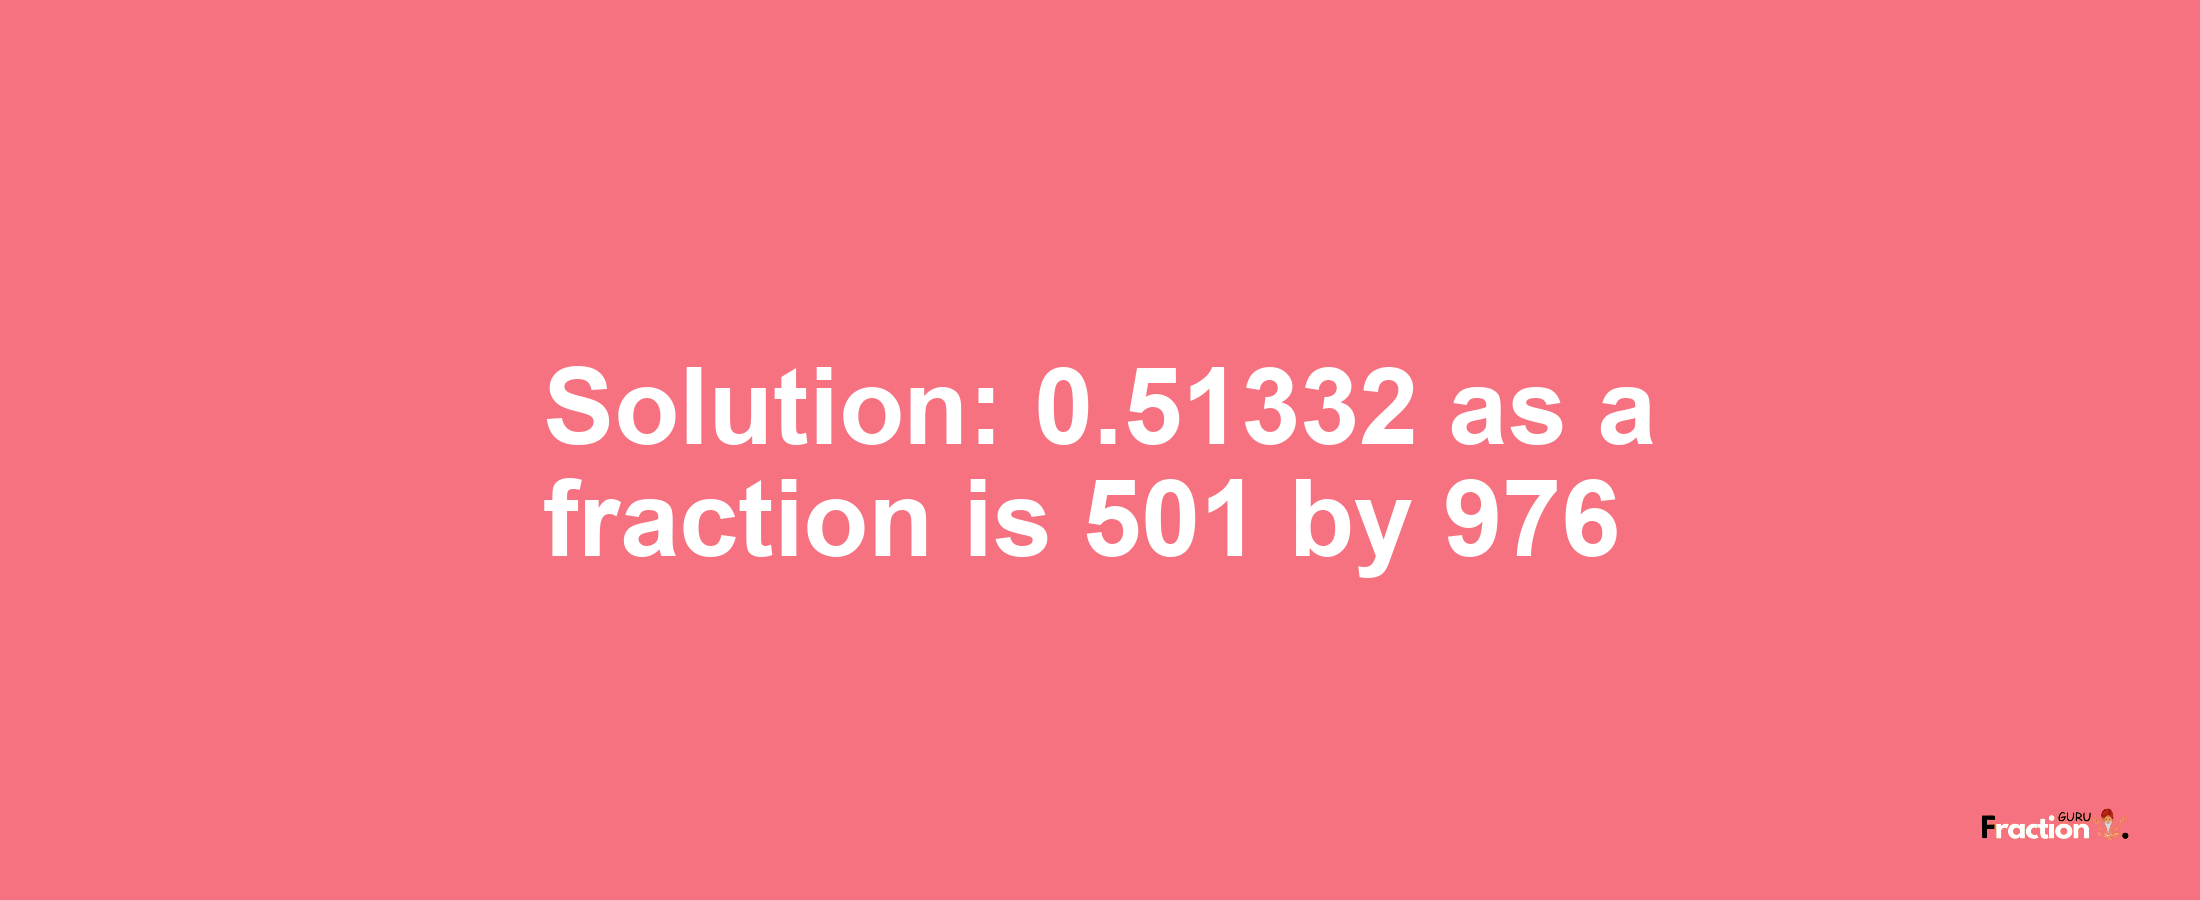 Solution:0.51332 as a fraction is 501/976